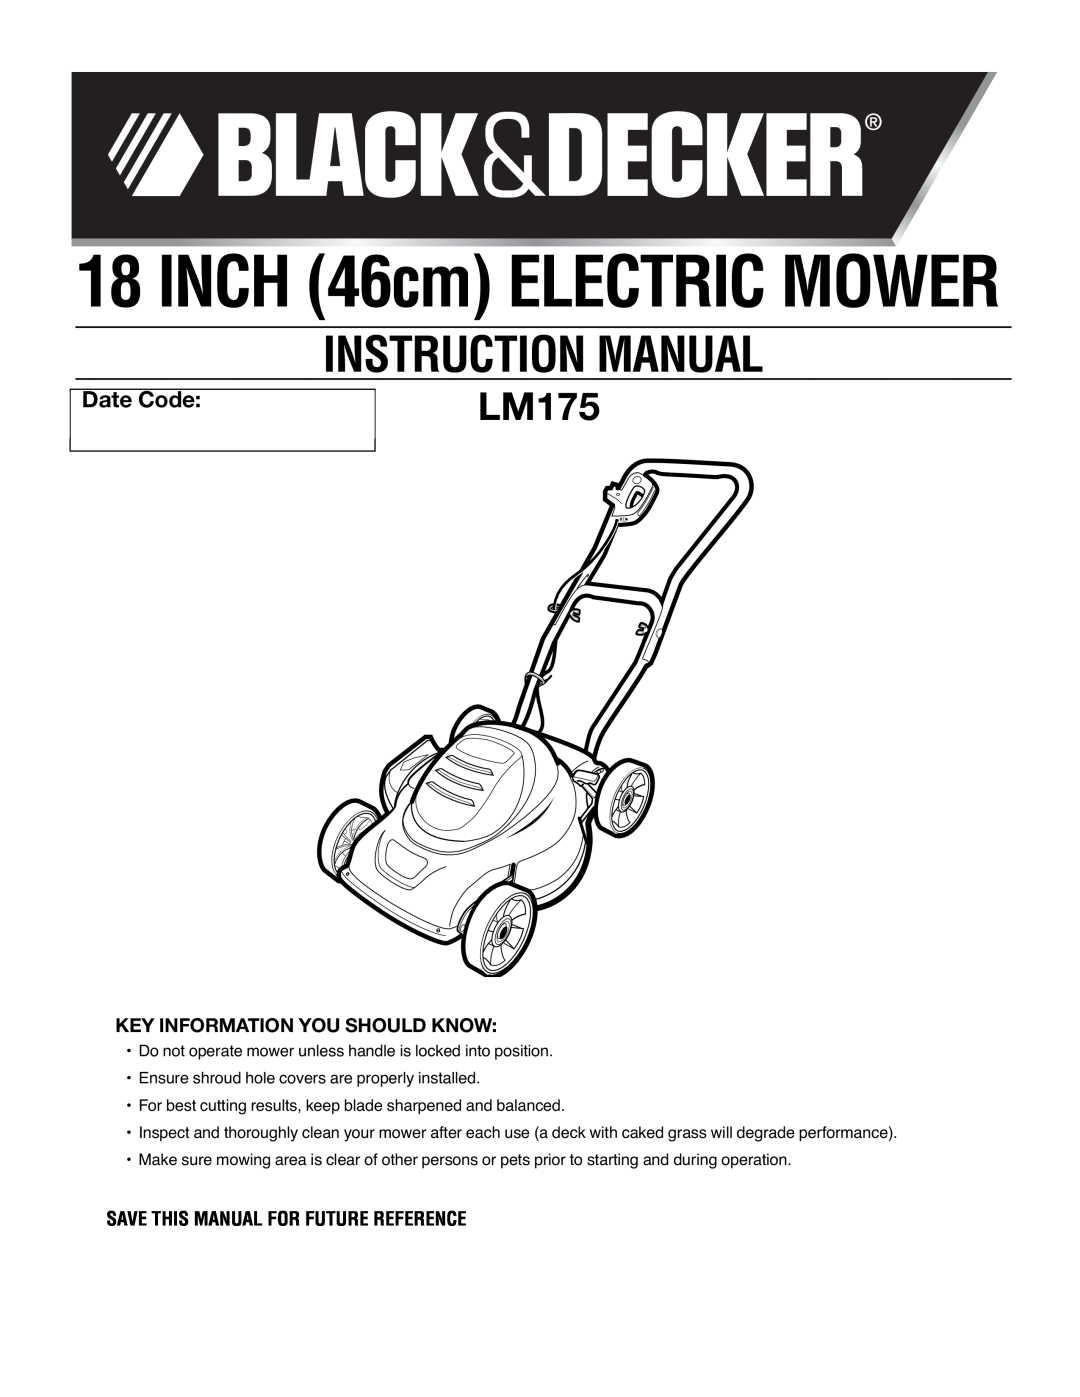 Black & Decker LM175 instruction manual Date Code, Key Information You Should Know, Save This Manual For Future Reference 